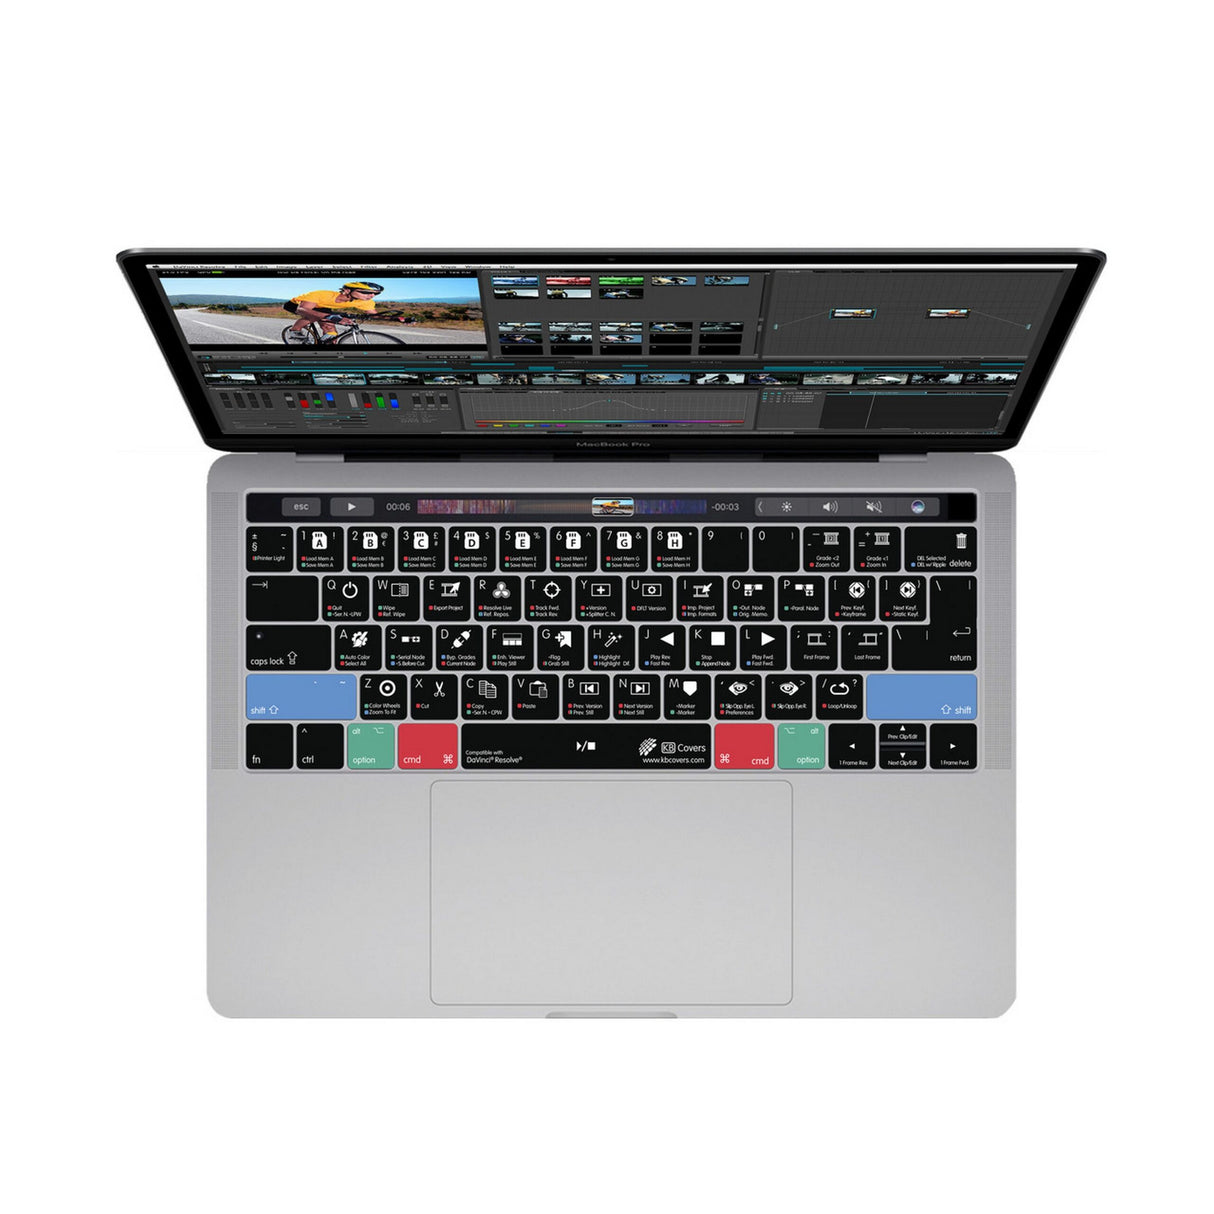 KB Covers DAVN-MTB DaVinci Resolve Keyboard Cover for MacBook Pro Late 2016+ with Touch Bar